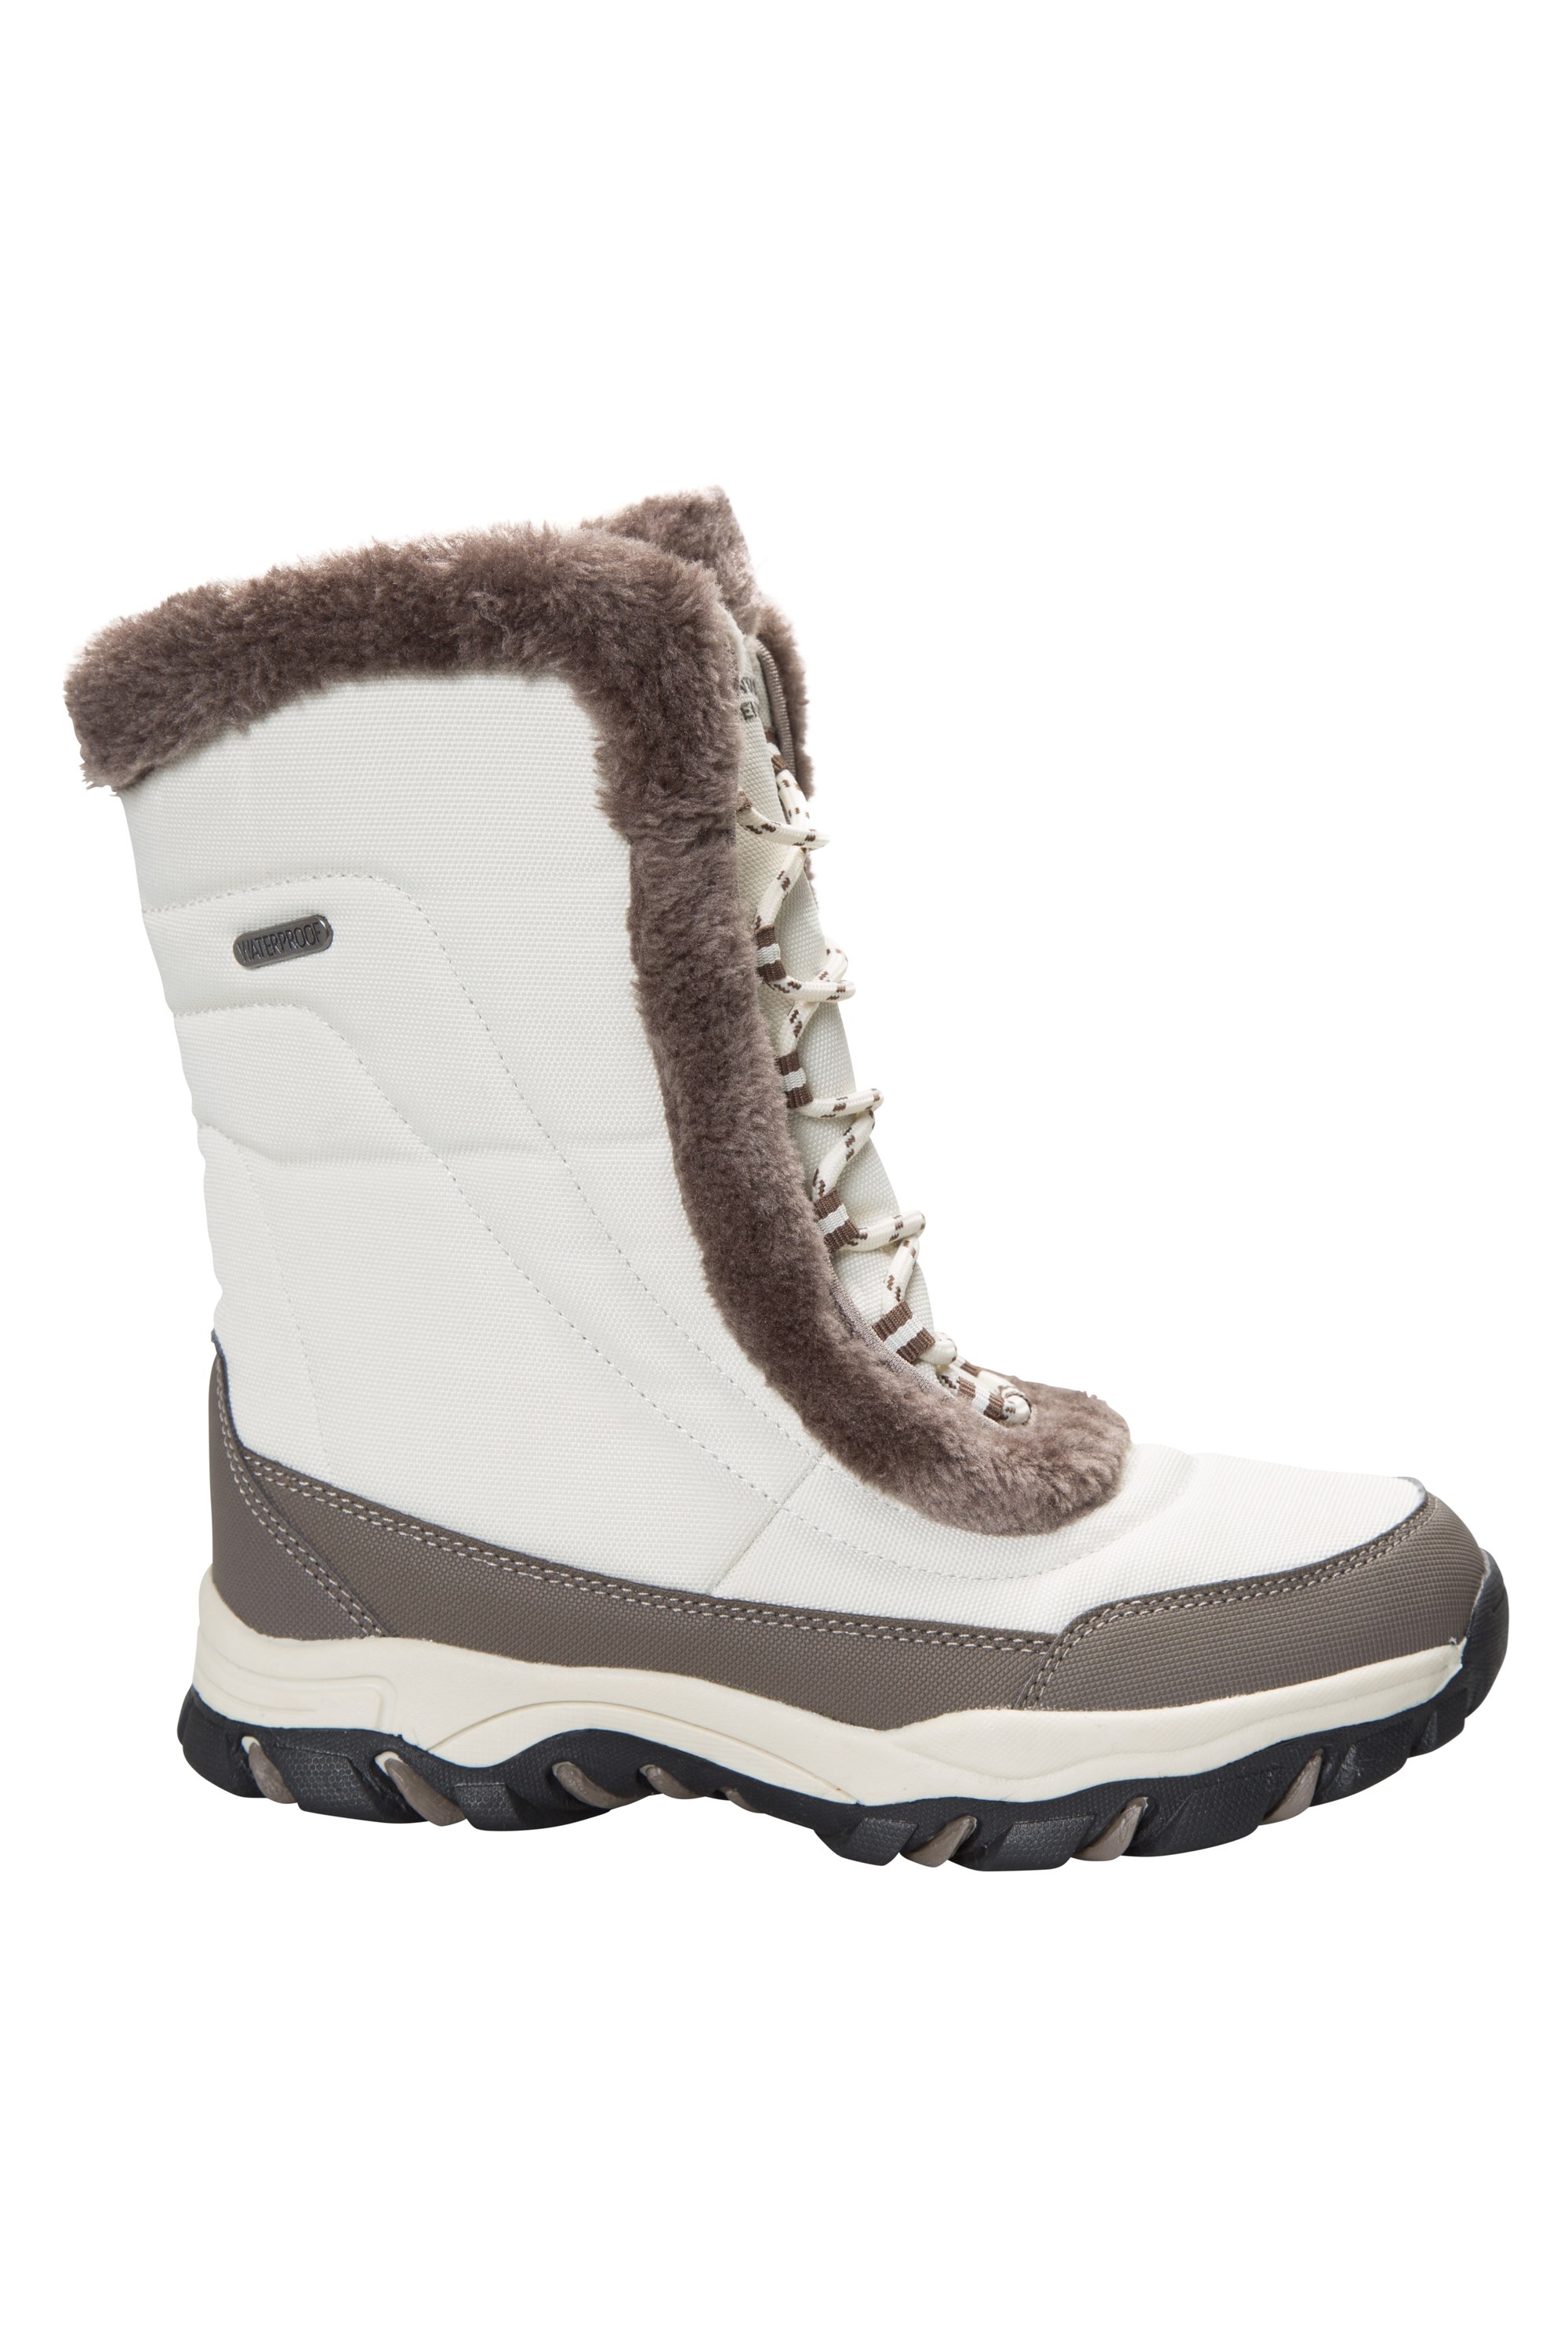 Ladies Winter Shoes Mountain Warehouse Womens Waterproof Snow Boots